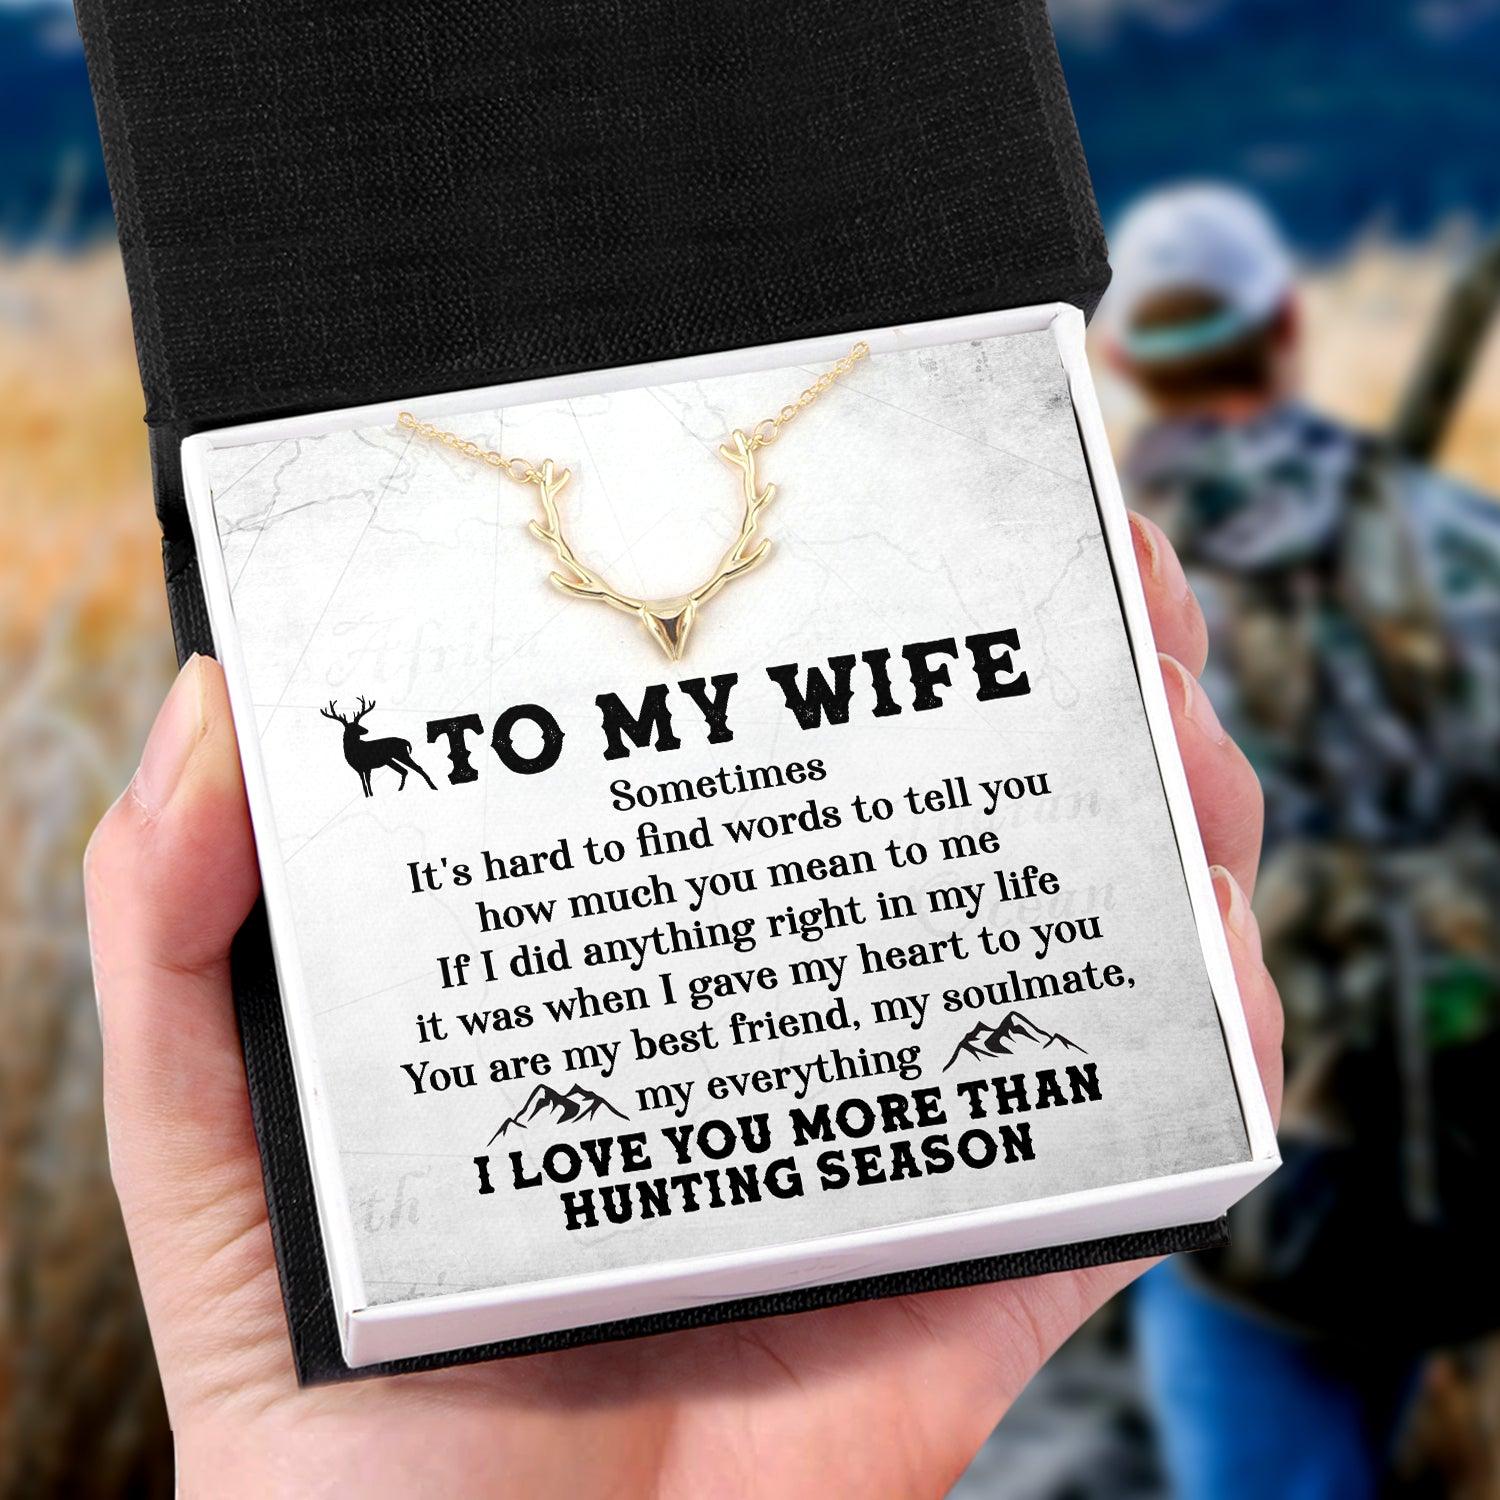 Antler Necklace - Hunting - To My Wife - I Love You More Than Hunting Season - Augnt15004 - Gifts Holder